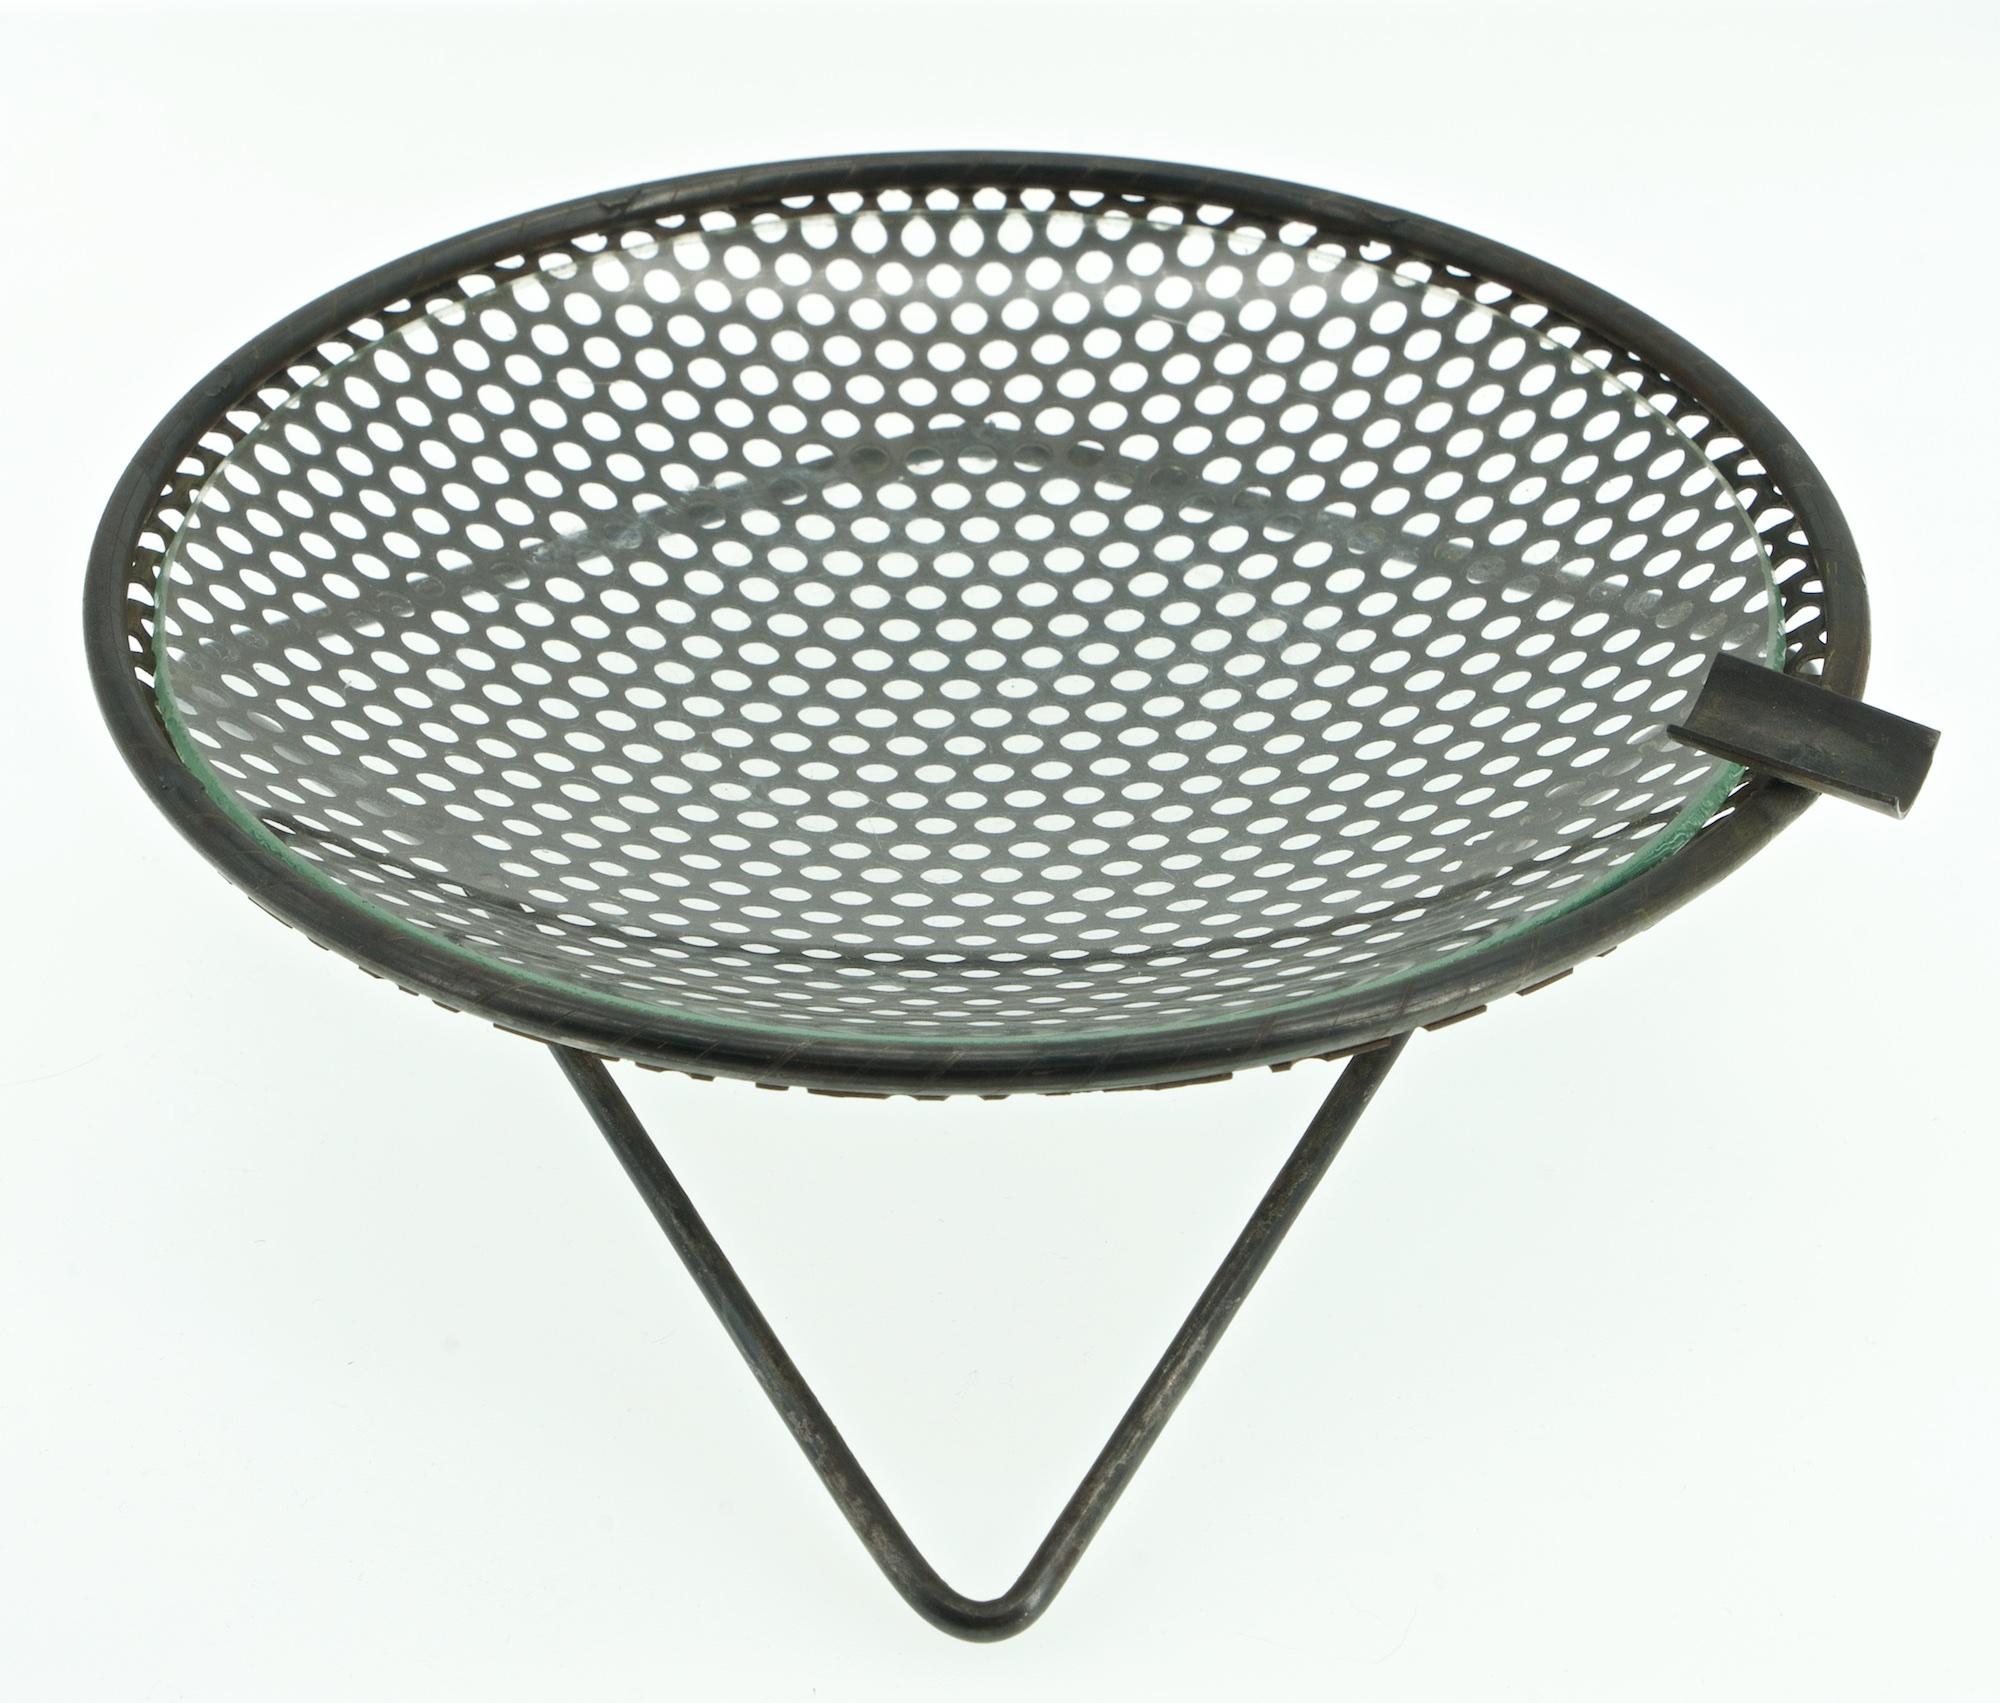 Steel 1950s Perforated Metal Atomic Dish Ashtray Nº S30 by Richard Galef Ravenware For Sale